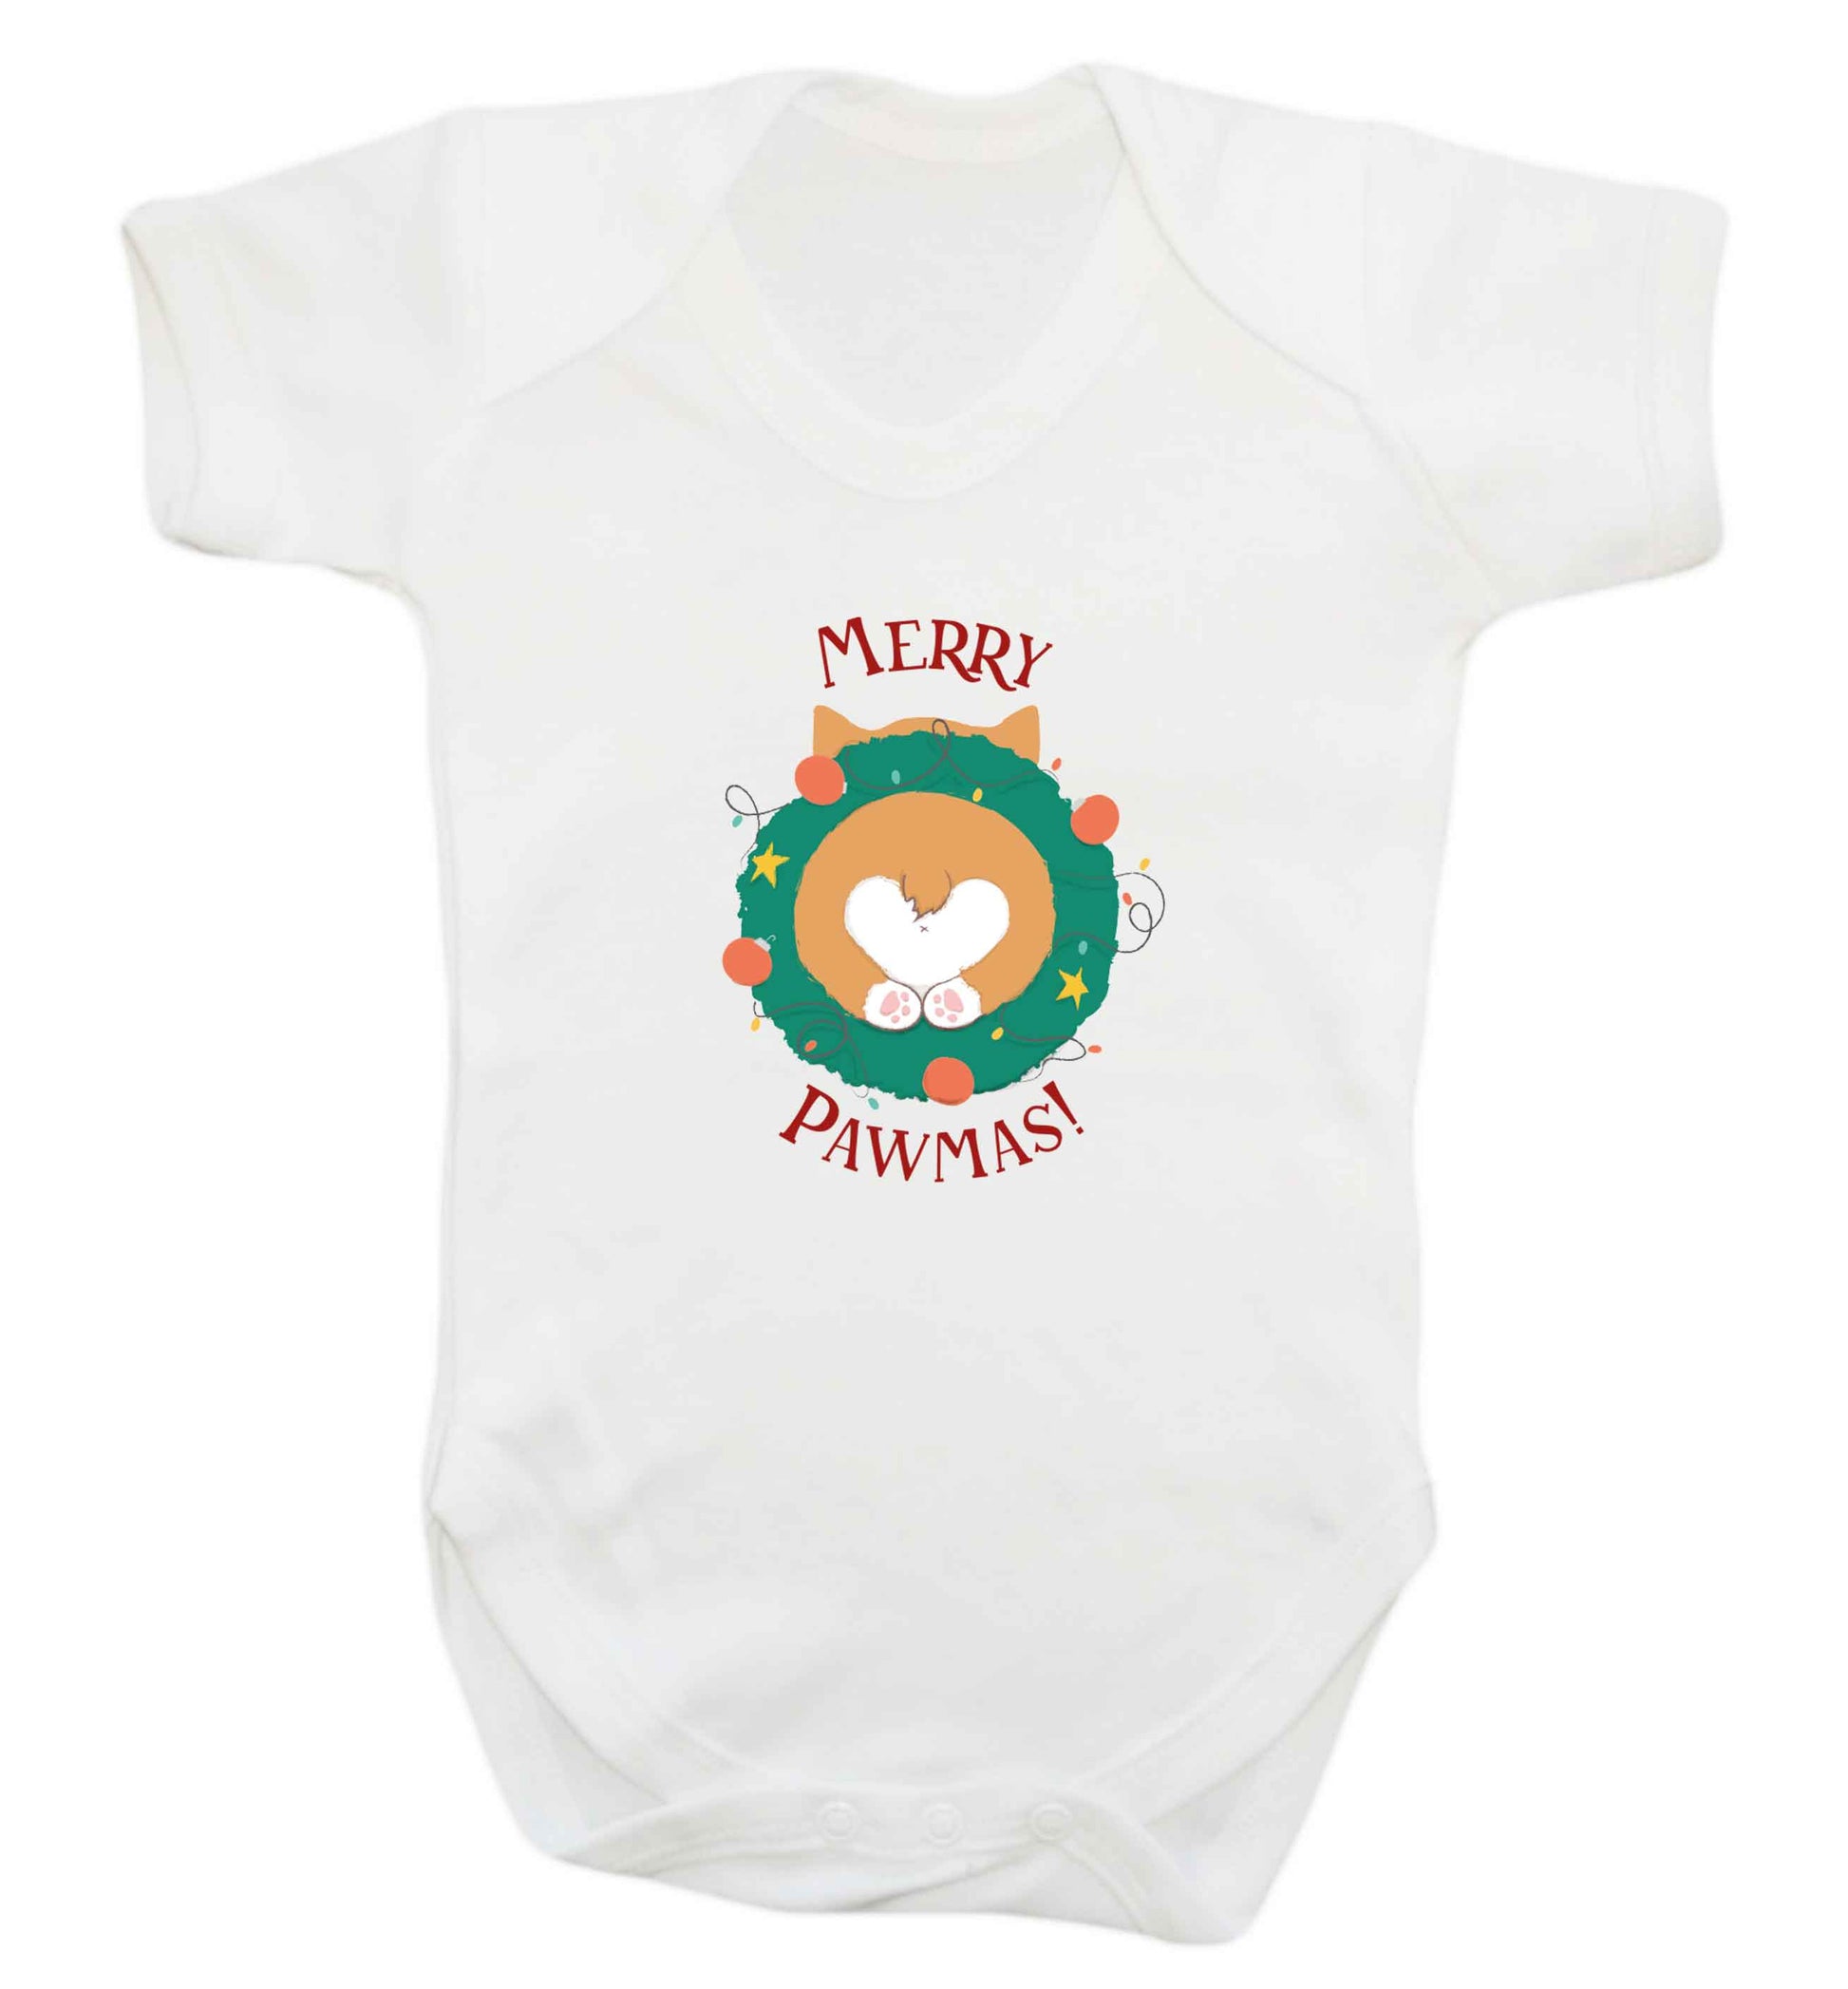 Merry Pawmas baby vest white 18-24 months